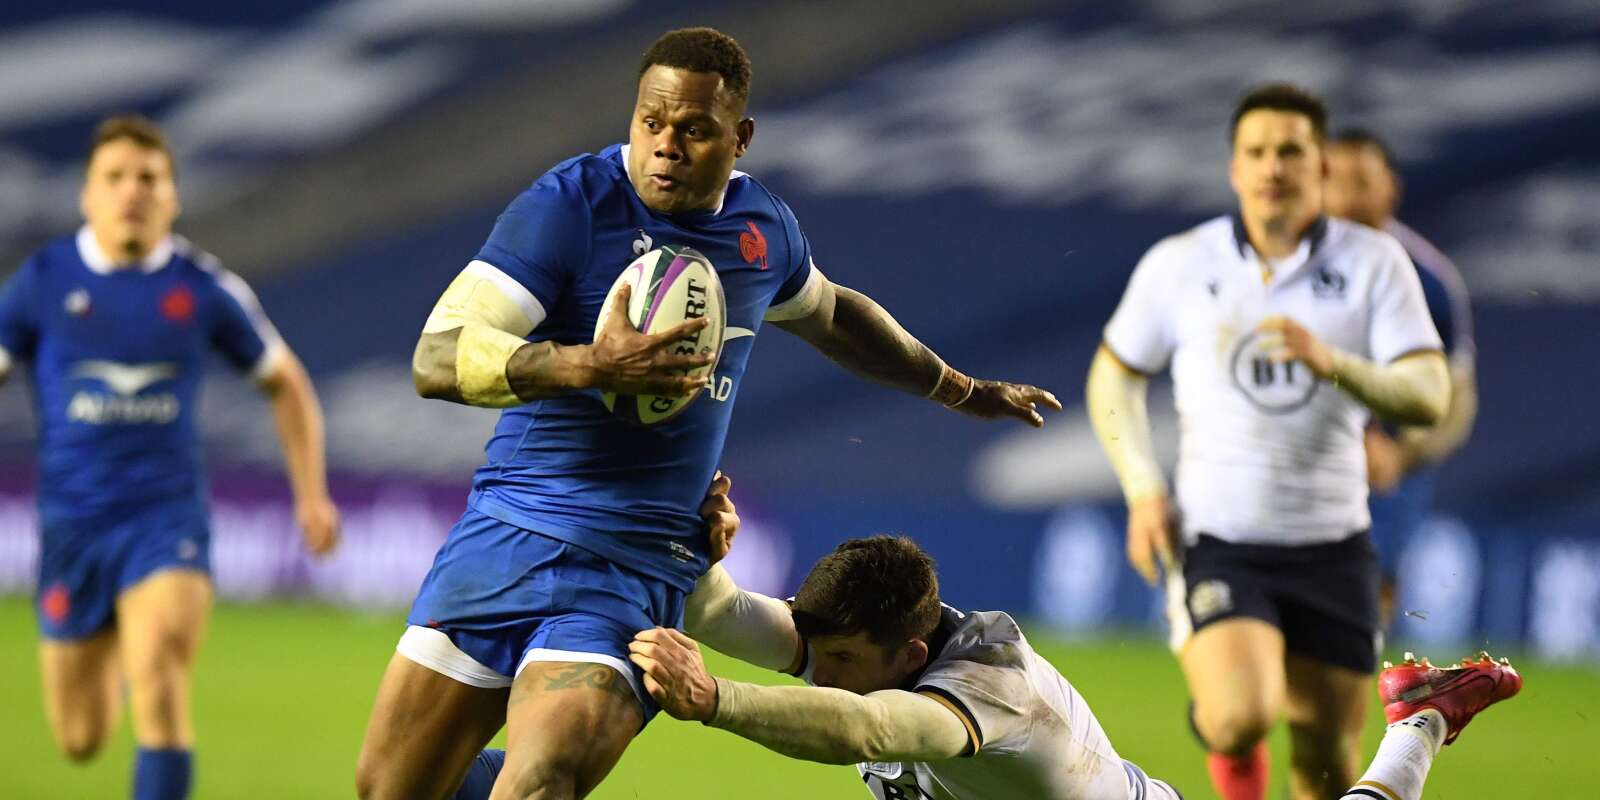 France's centre Virimi Vakatawa runs to score the opening try during the Pool B Autumn Nations Cup international rugby union match between Scotland and France at Murrayfield Stadium in Edinburgh on November 22, 2020. / AFP / ANDY BUCHANAN